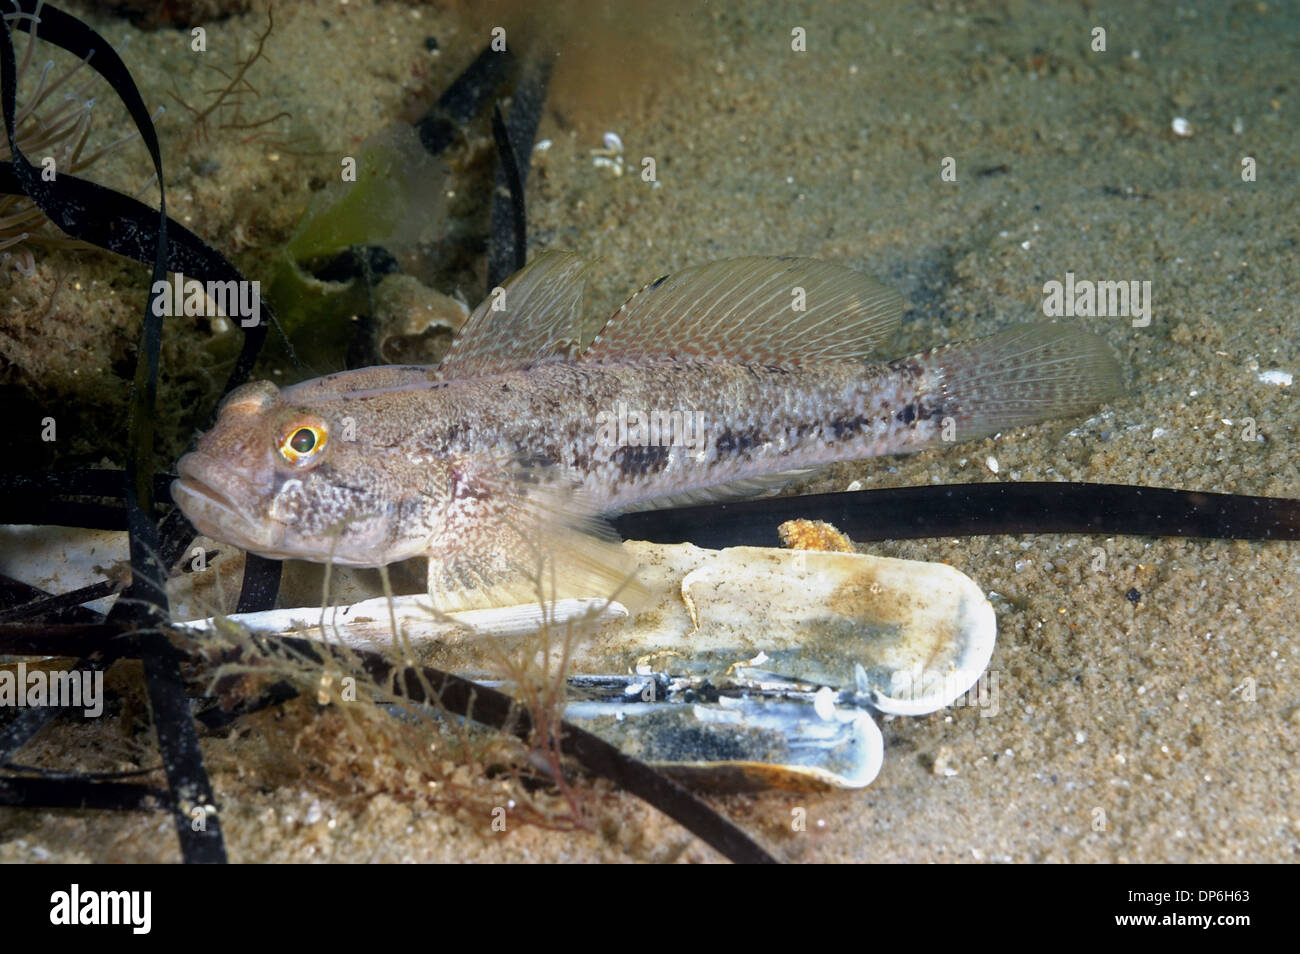 Black Goby (Gobius niger) adult, resting on sandy seabed, Studland Bay, Isle of Purbeck, Dorset, England, August Stock Photo